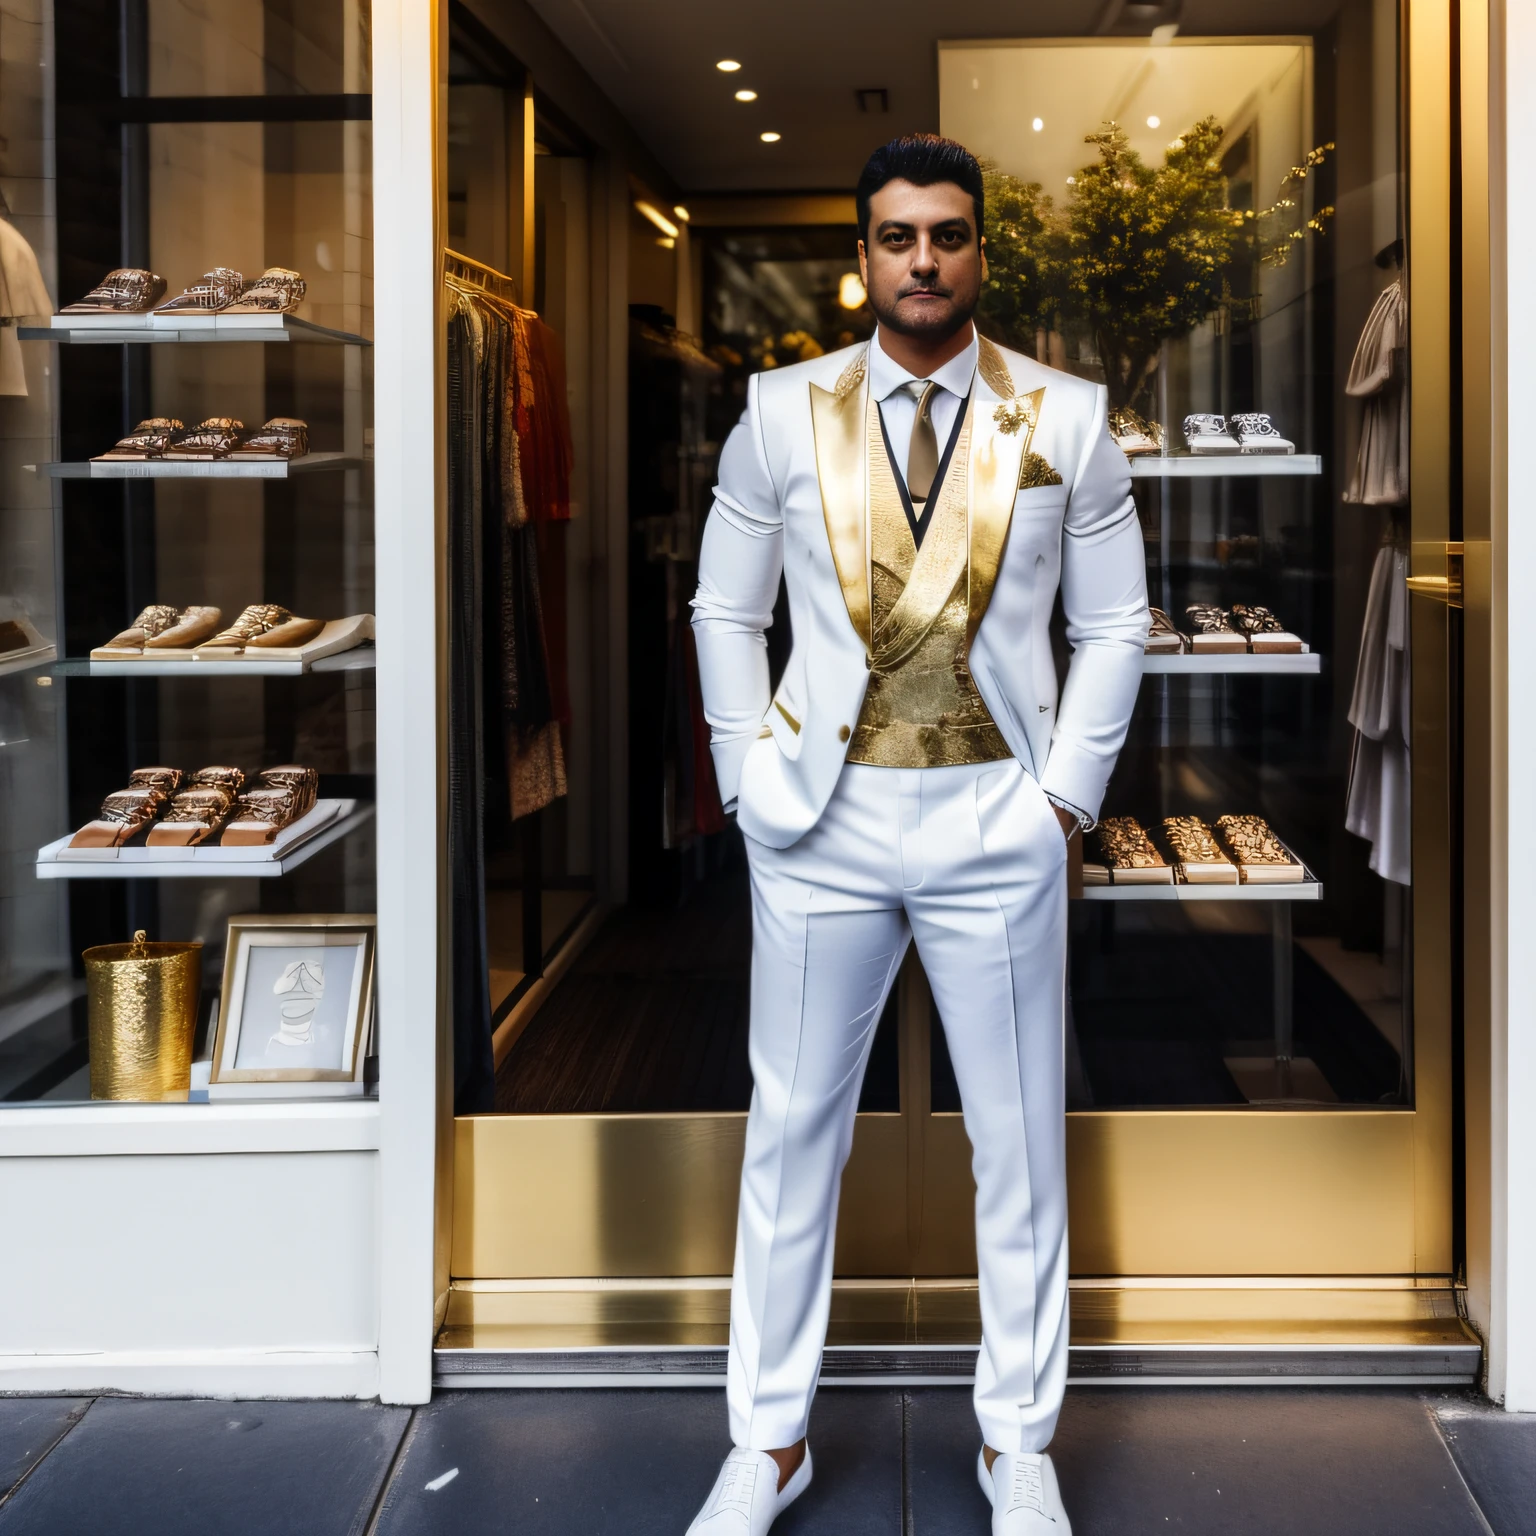 A full-body man standing leaning against a street shop window in a white social outfit with gold accents looking out front of the store at dusk